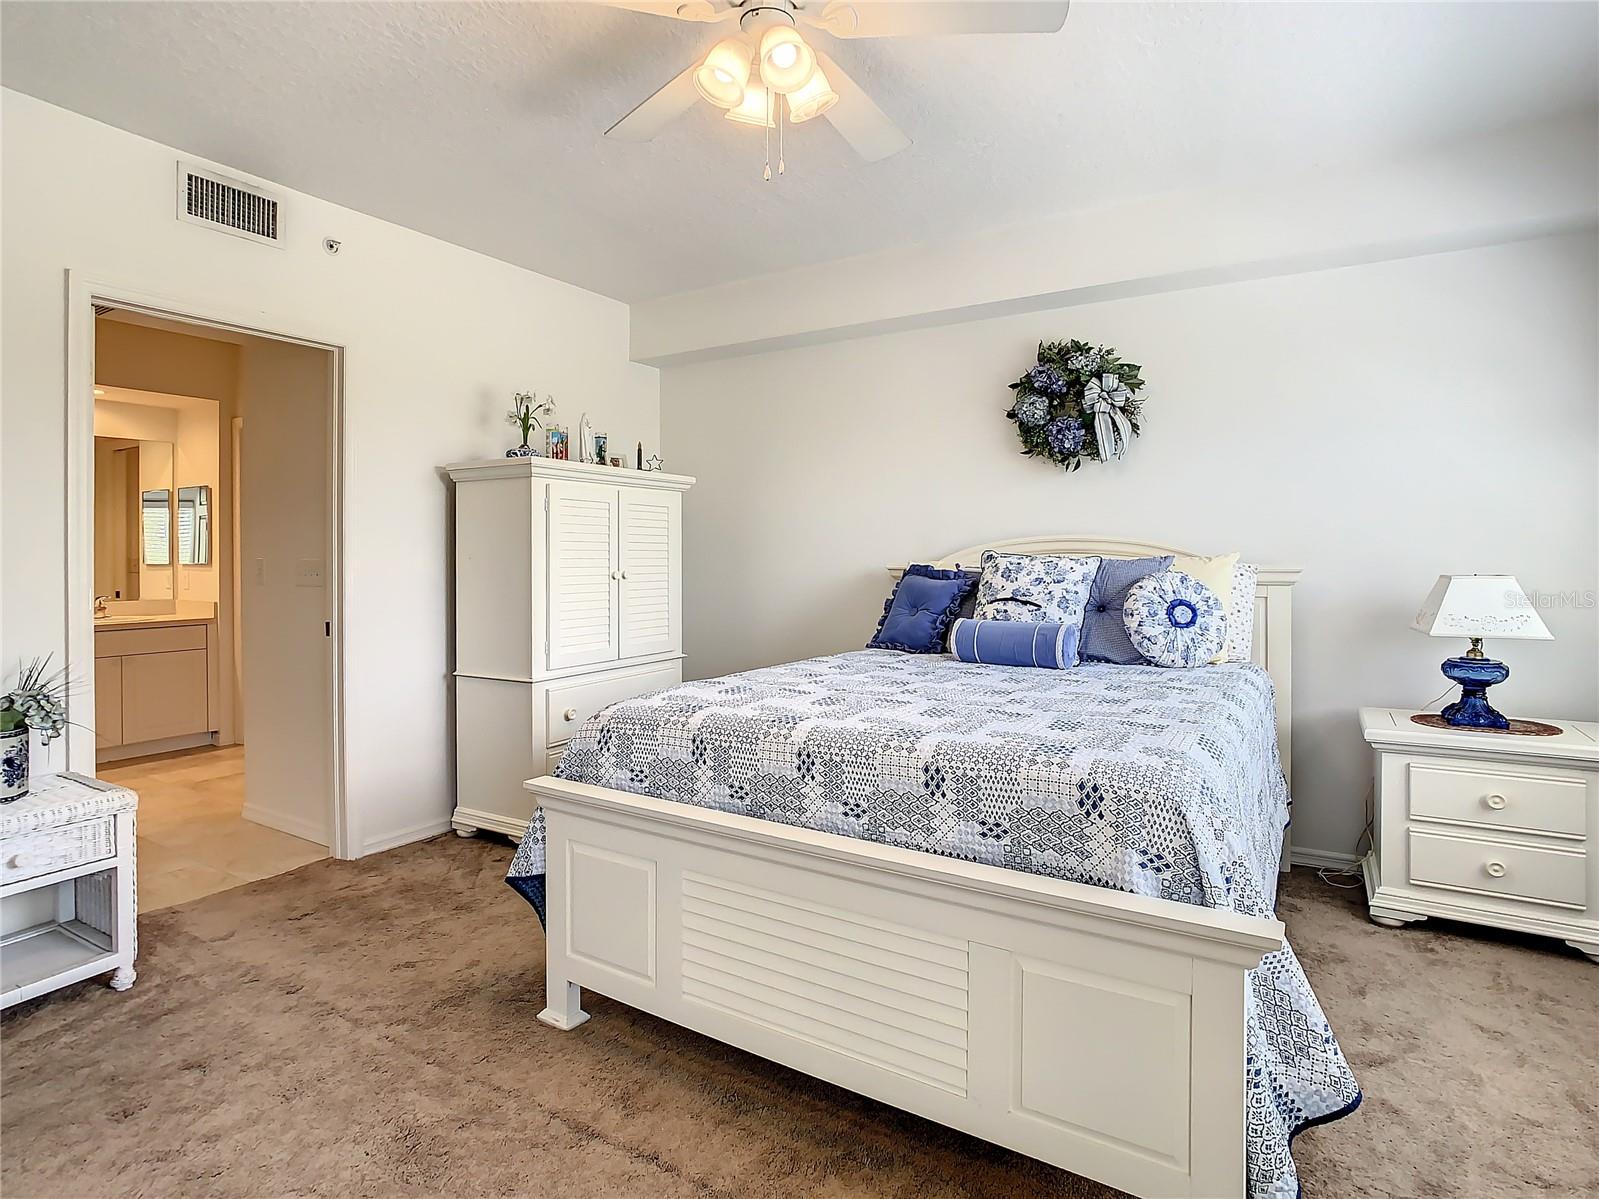 The master bedroom boasts private access to the balcony, an ensuite bath with his and her walk-in closets, a dual sink vanity, and stand-up shower